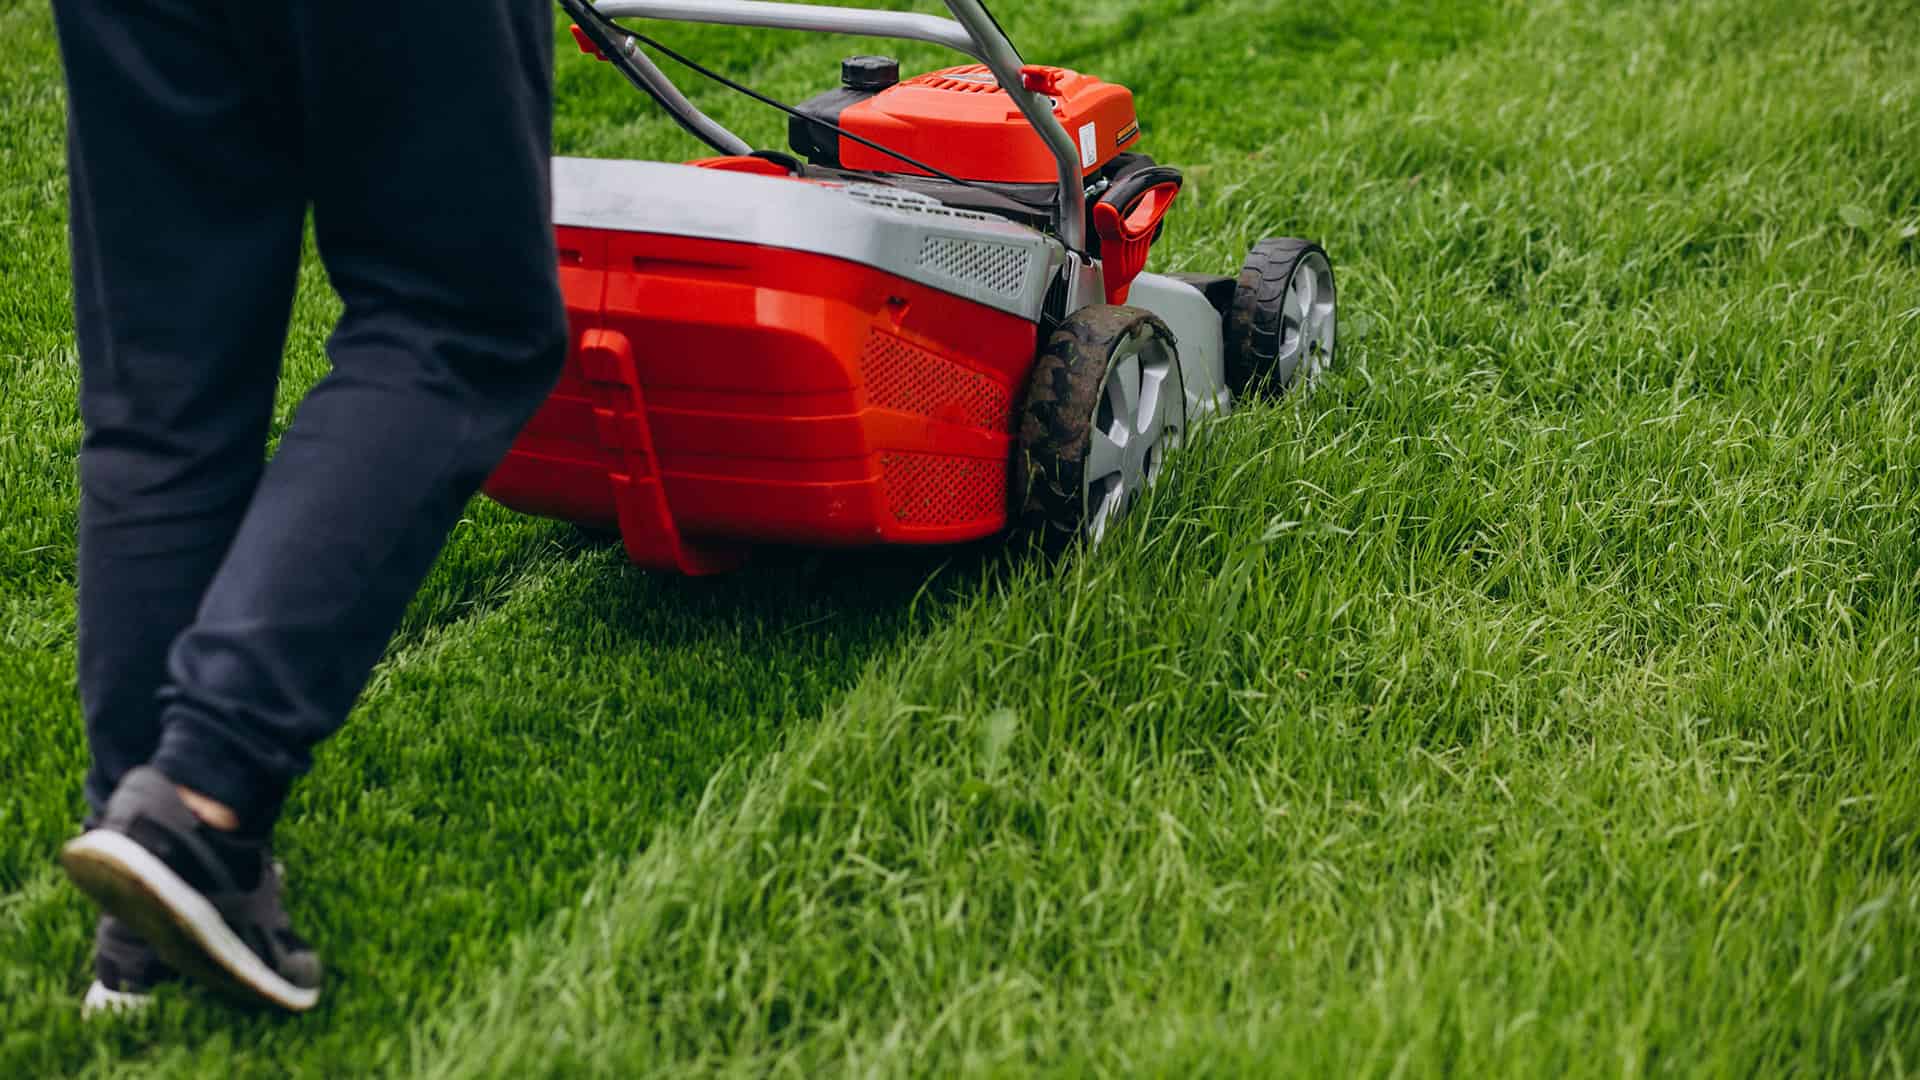 How to become a Lawn Mower Master?